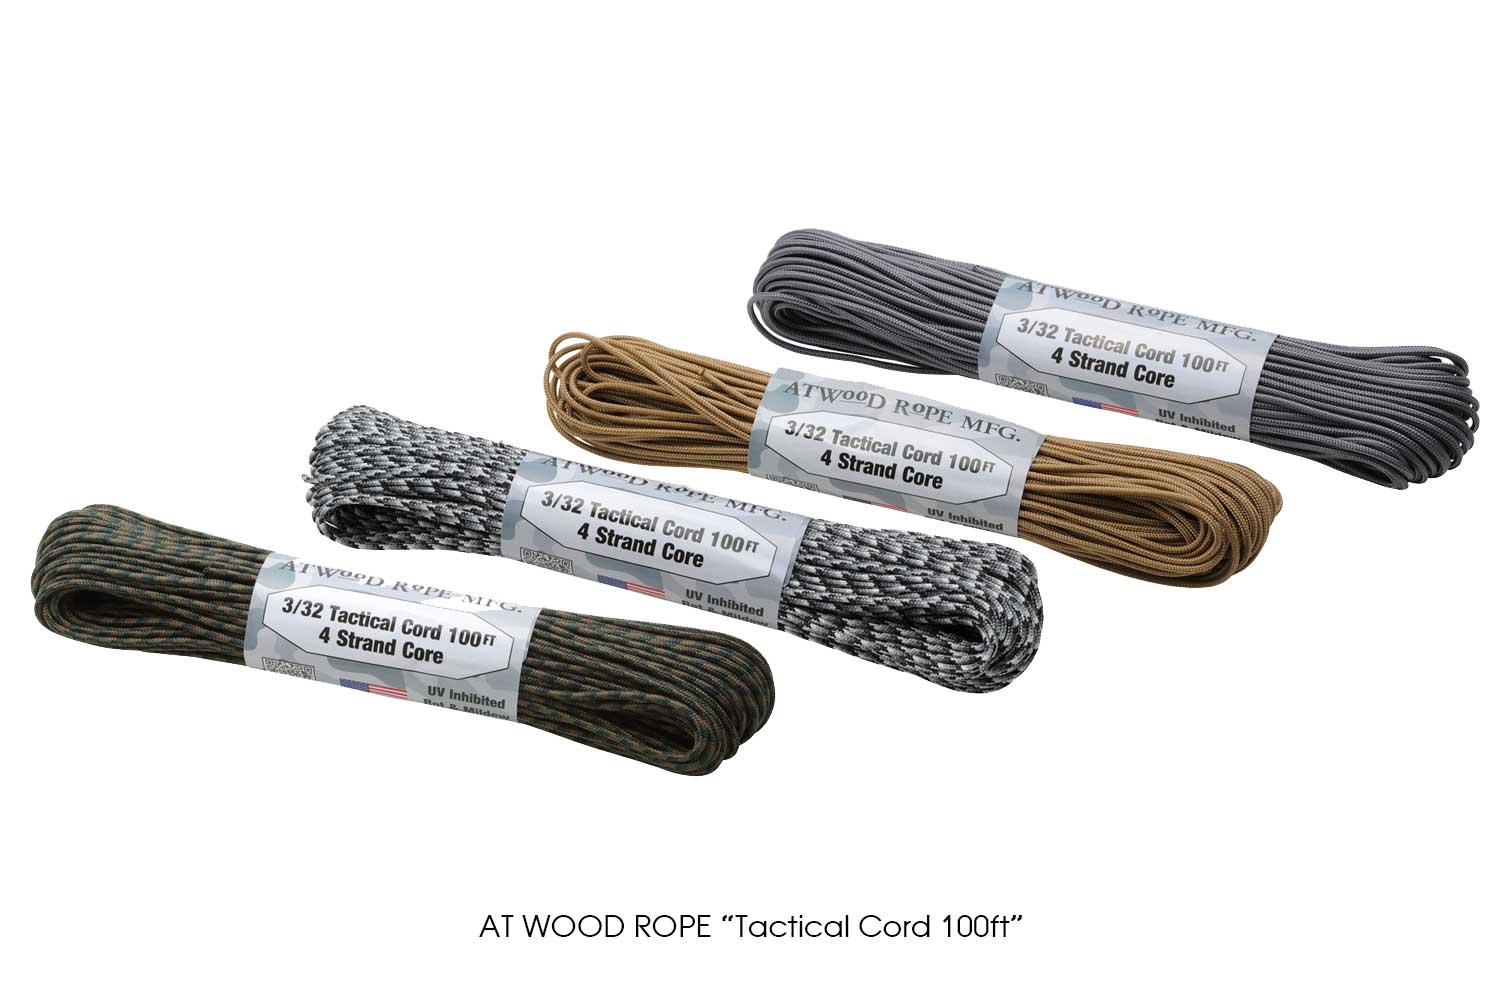 AT WOOD ROPE "Tactical Cord 100ft"